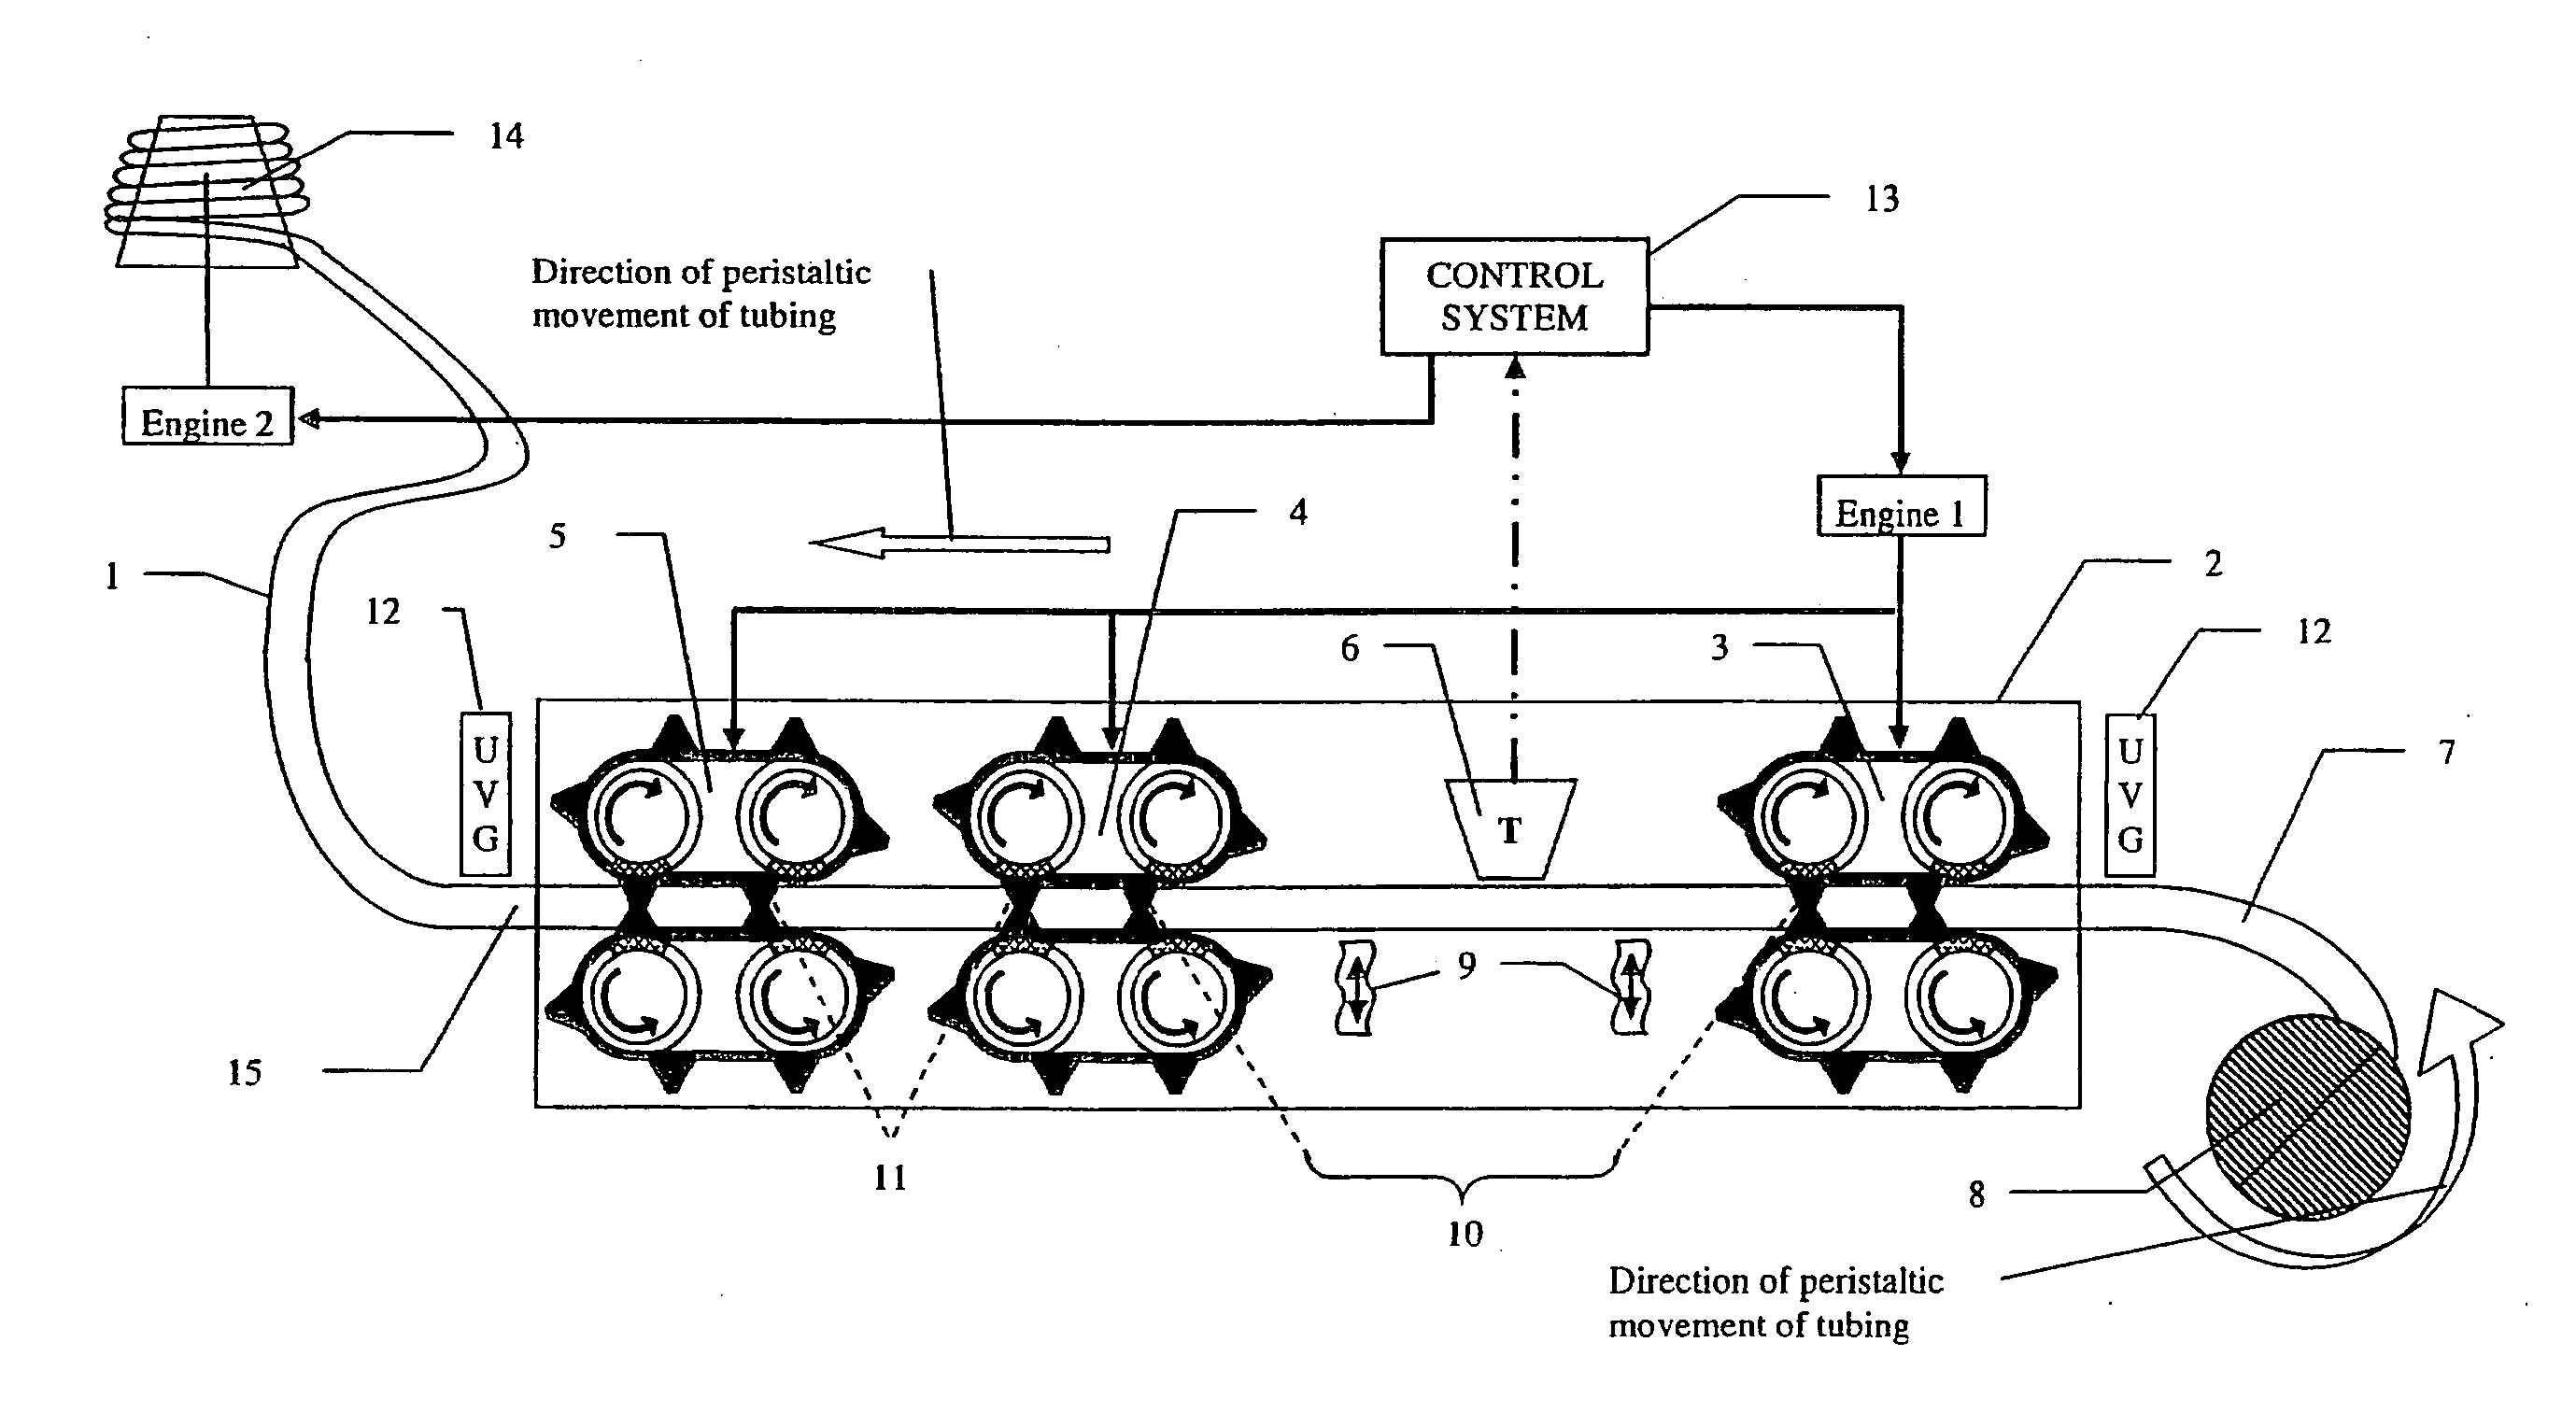 Continuous culture apparatus with mobile vessel, allowing selection of fitter cell variants and producing a culture in a continuous manner